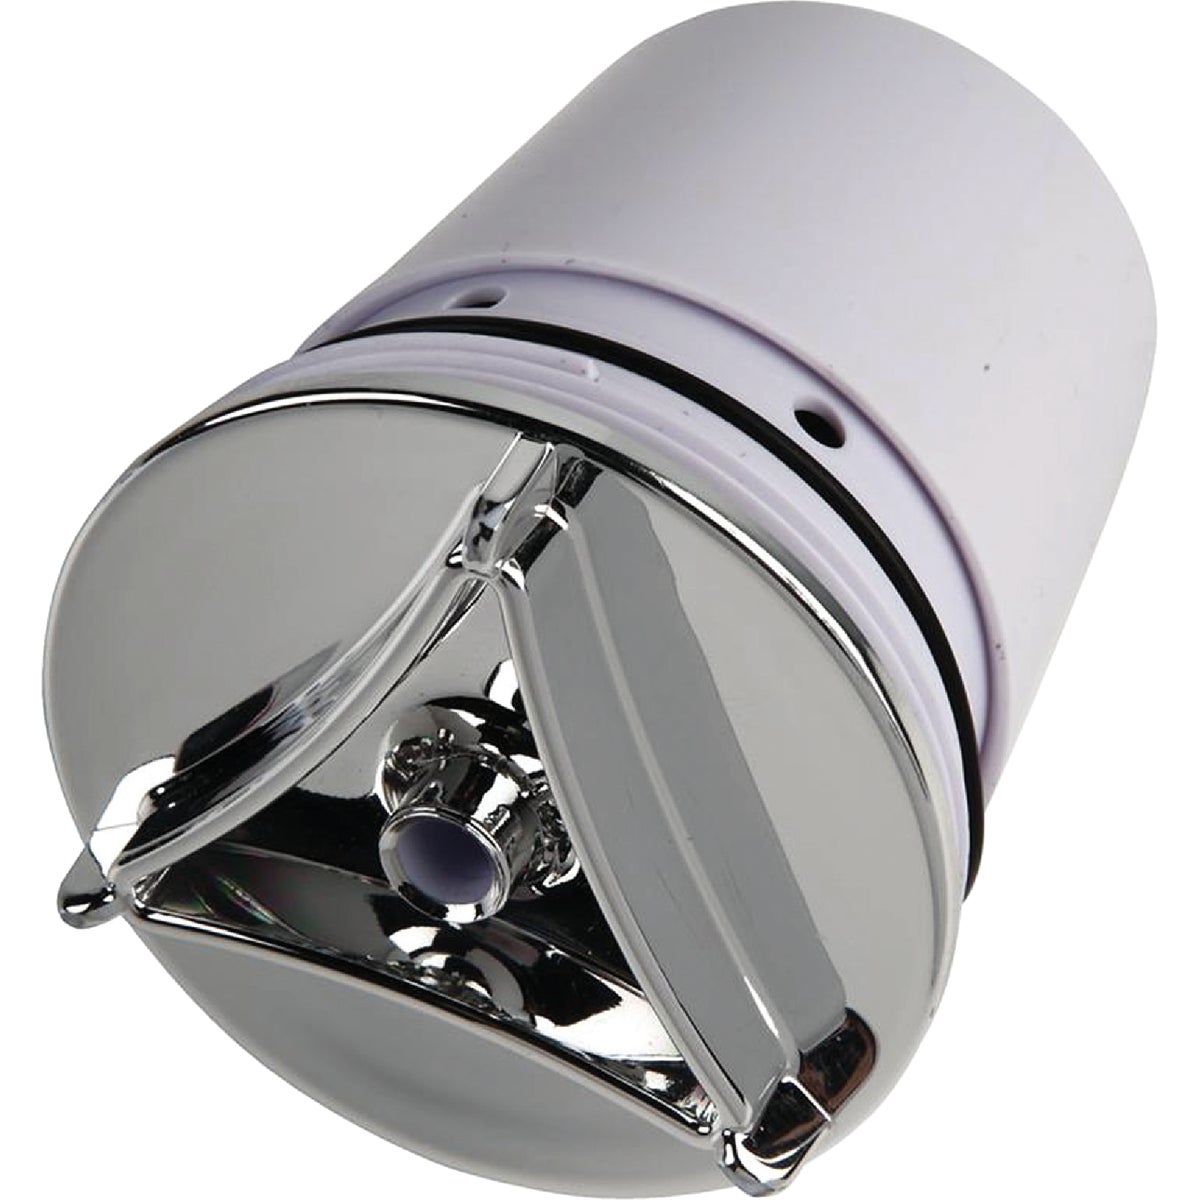 Item 400506, The Culligan's faucet mount polished chrome replacement cartridge improves 